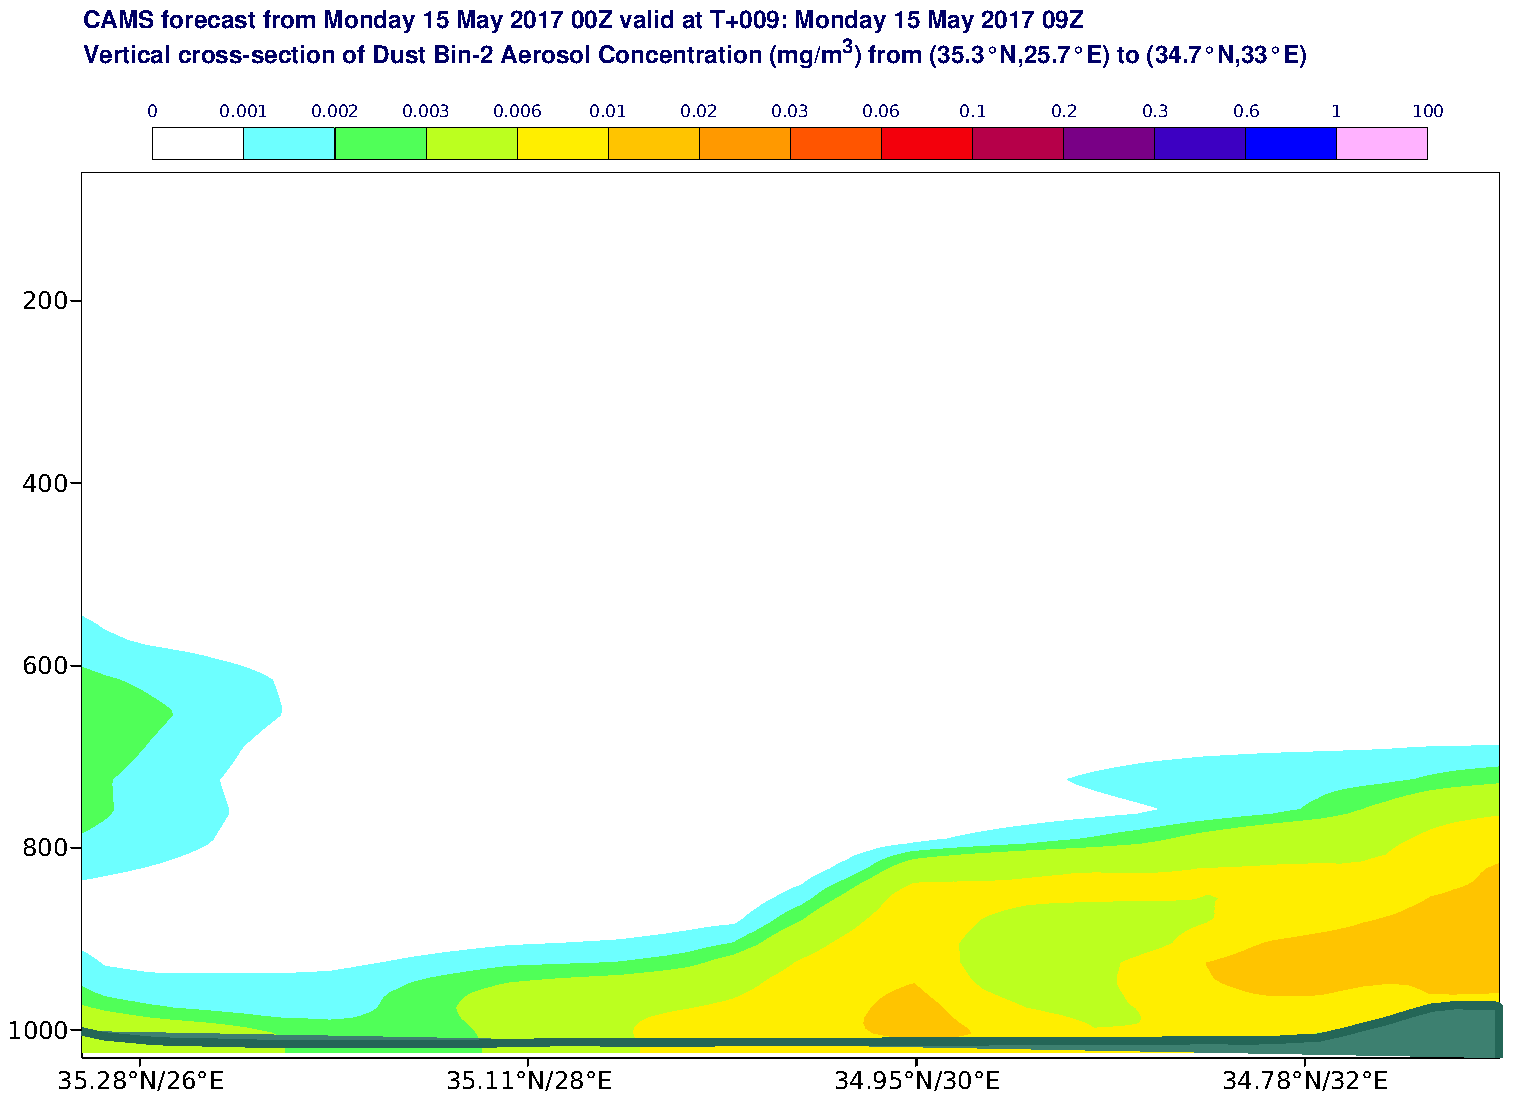 Vertical cross-section of Dust Bin-2 Aerosol Concentration (mg/m3) valid at T9 - 2017-05-15 09:00